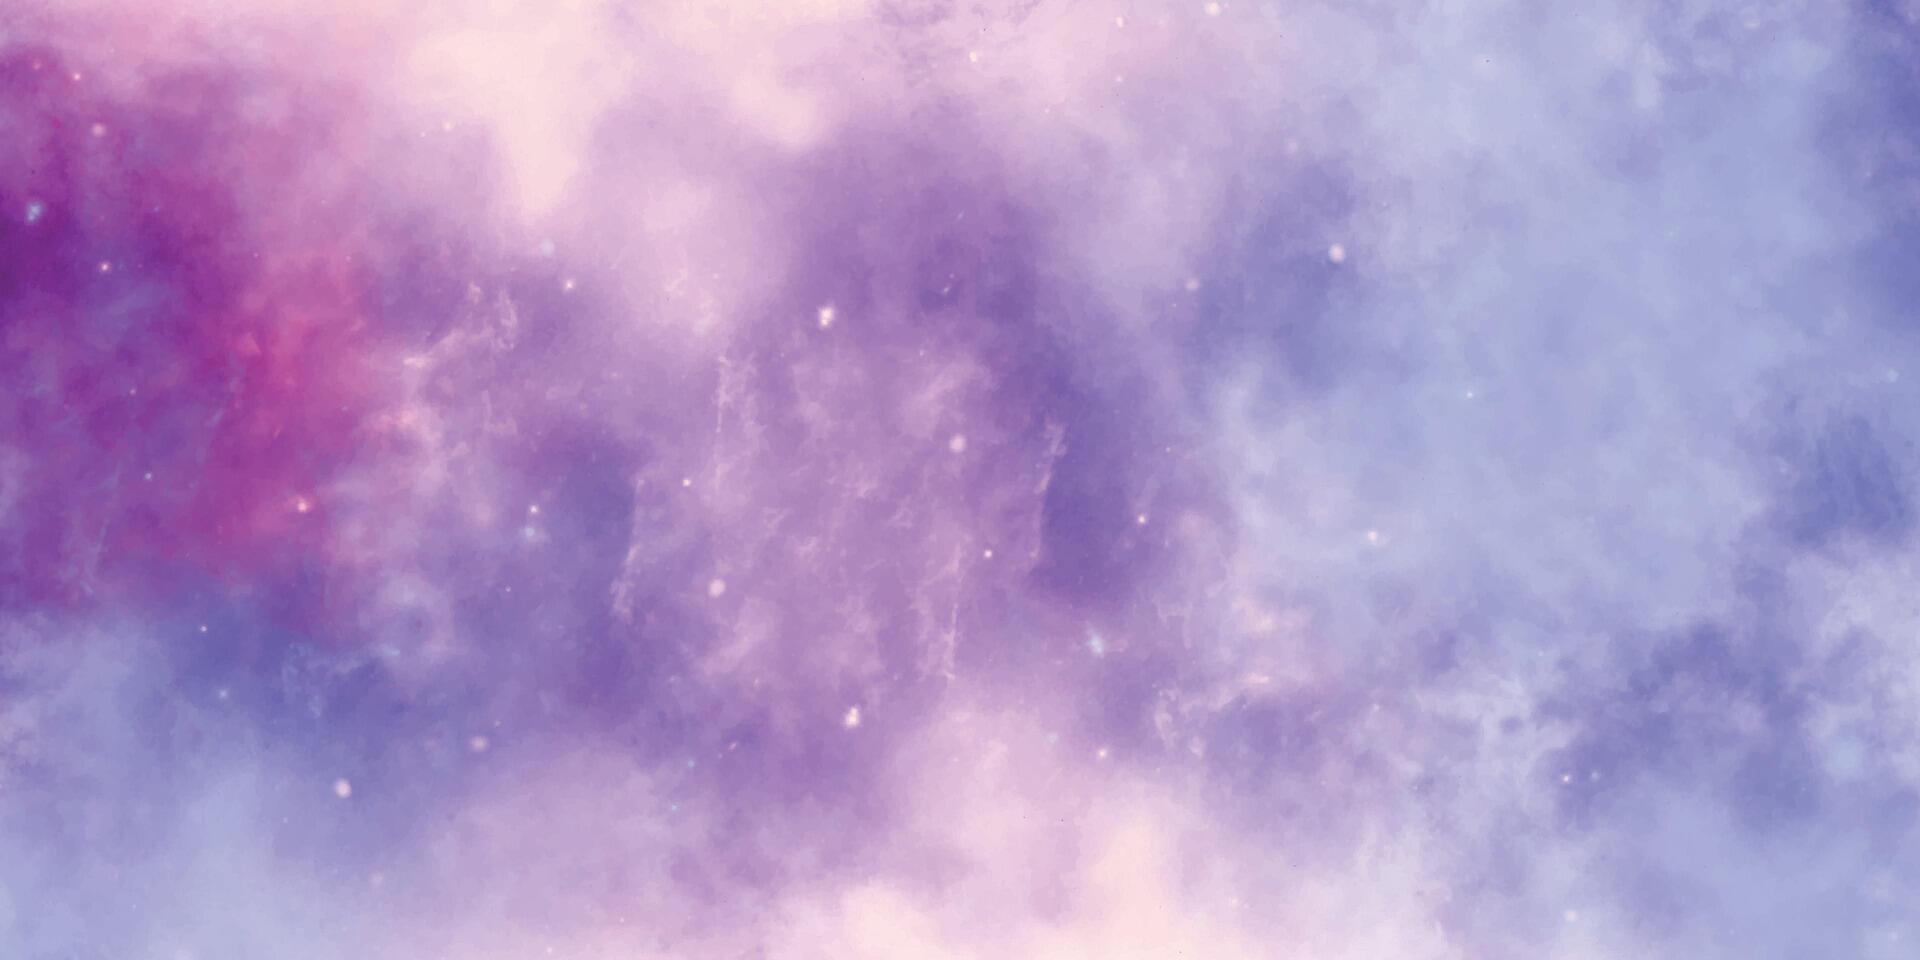 colorful watercolor space background. nebula in space. universe watercolor background texture. beautiful blue, purple, white, and red background with stars vector